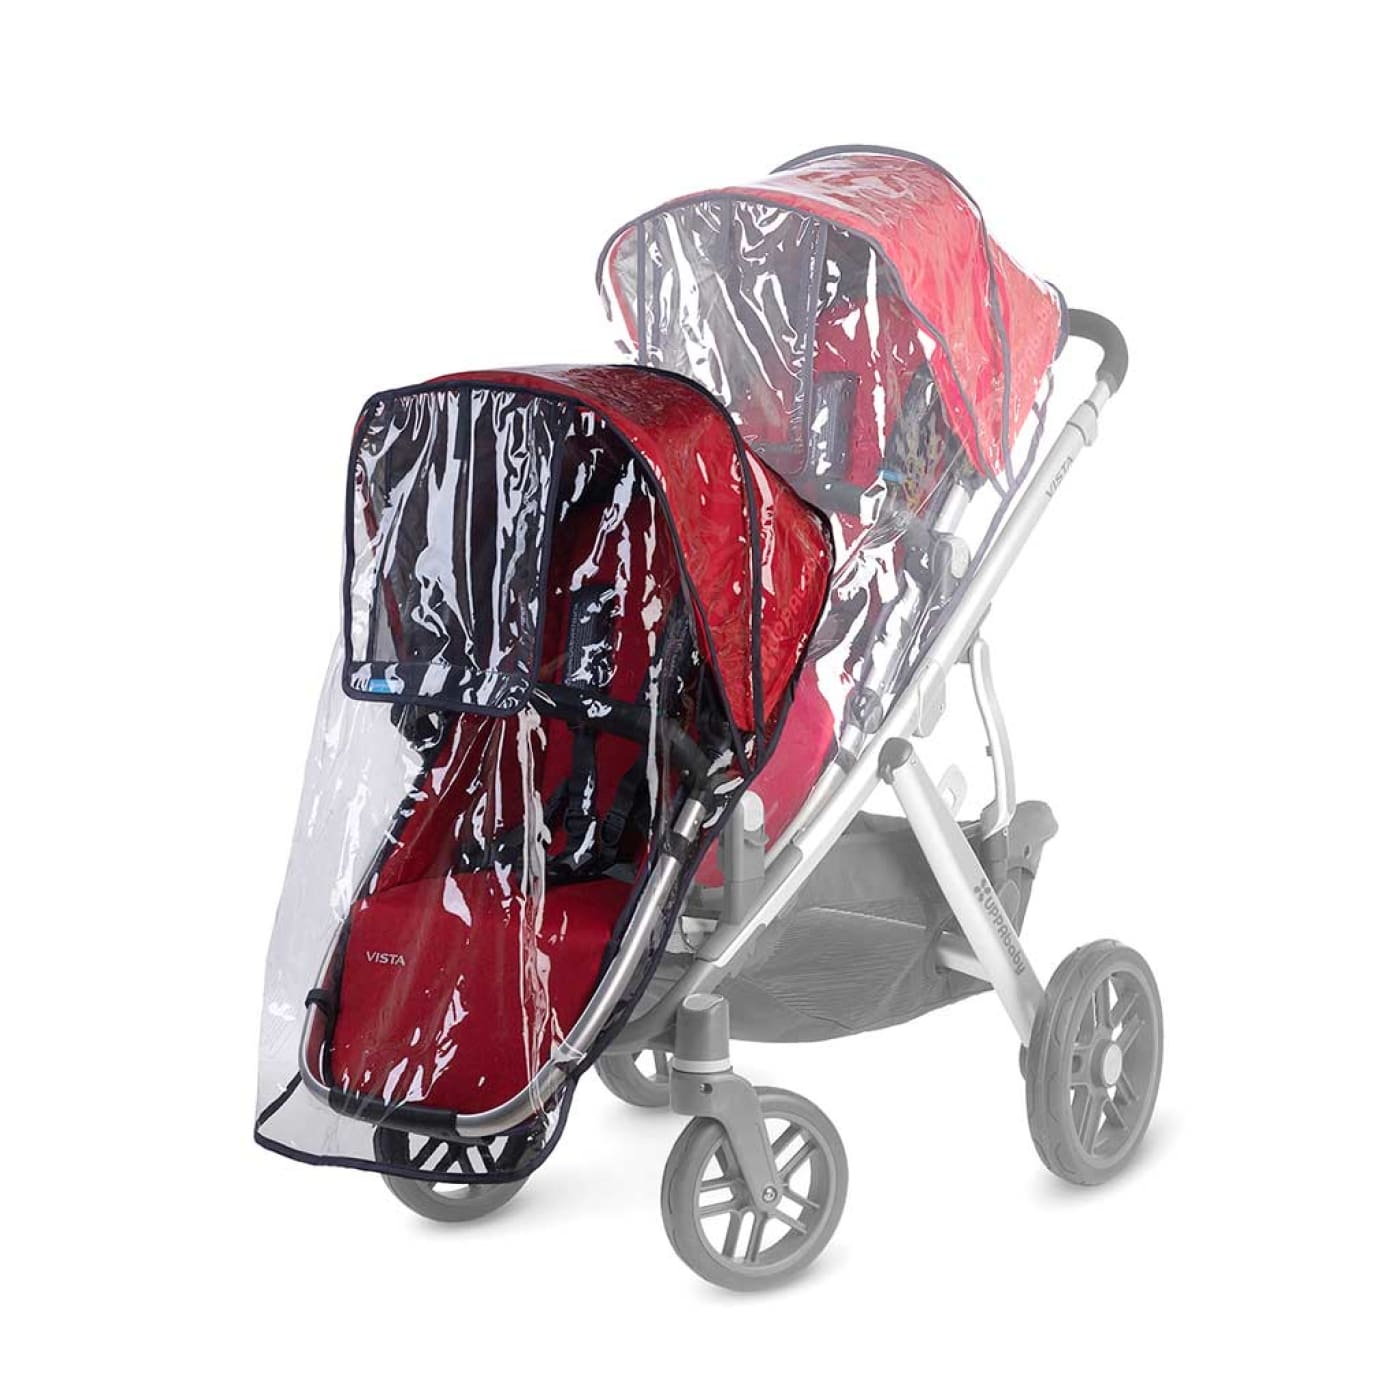 UPPAbaby Vista Rumble Seat Rainshield - PRAMS & STROLLERS - SUN COVERS/WEATHER SHIELDS